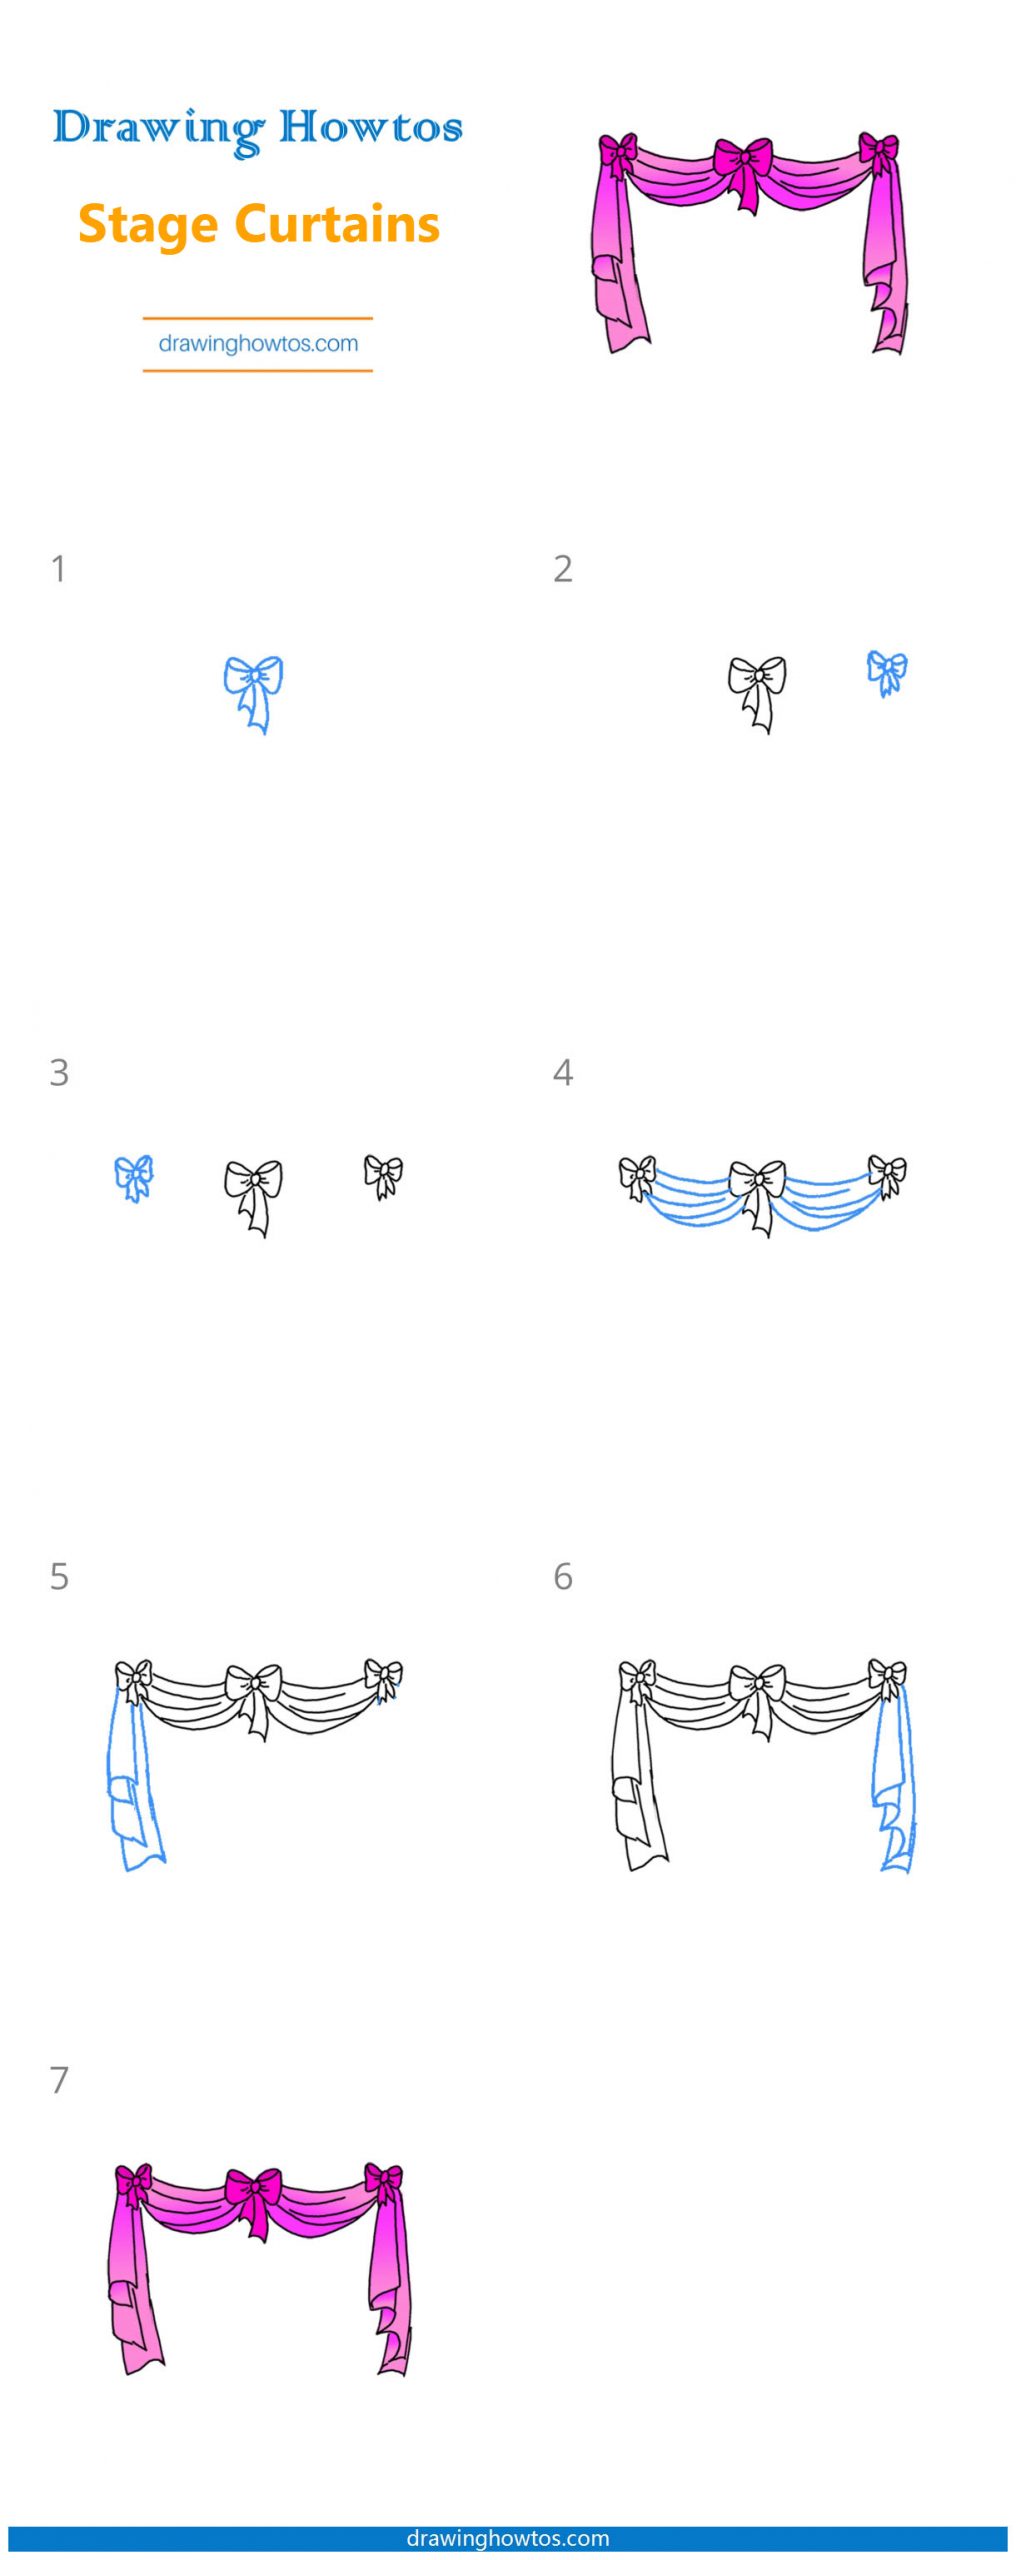 How to Draw Stage Curtains Step by Step